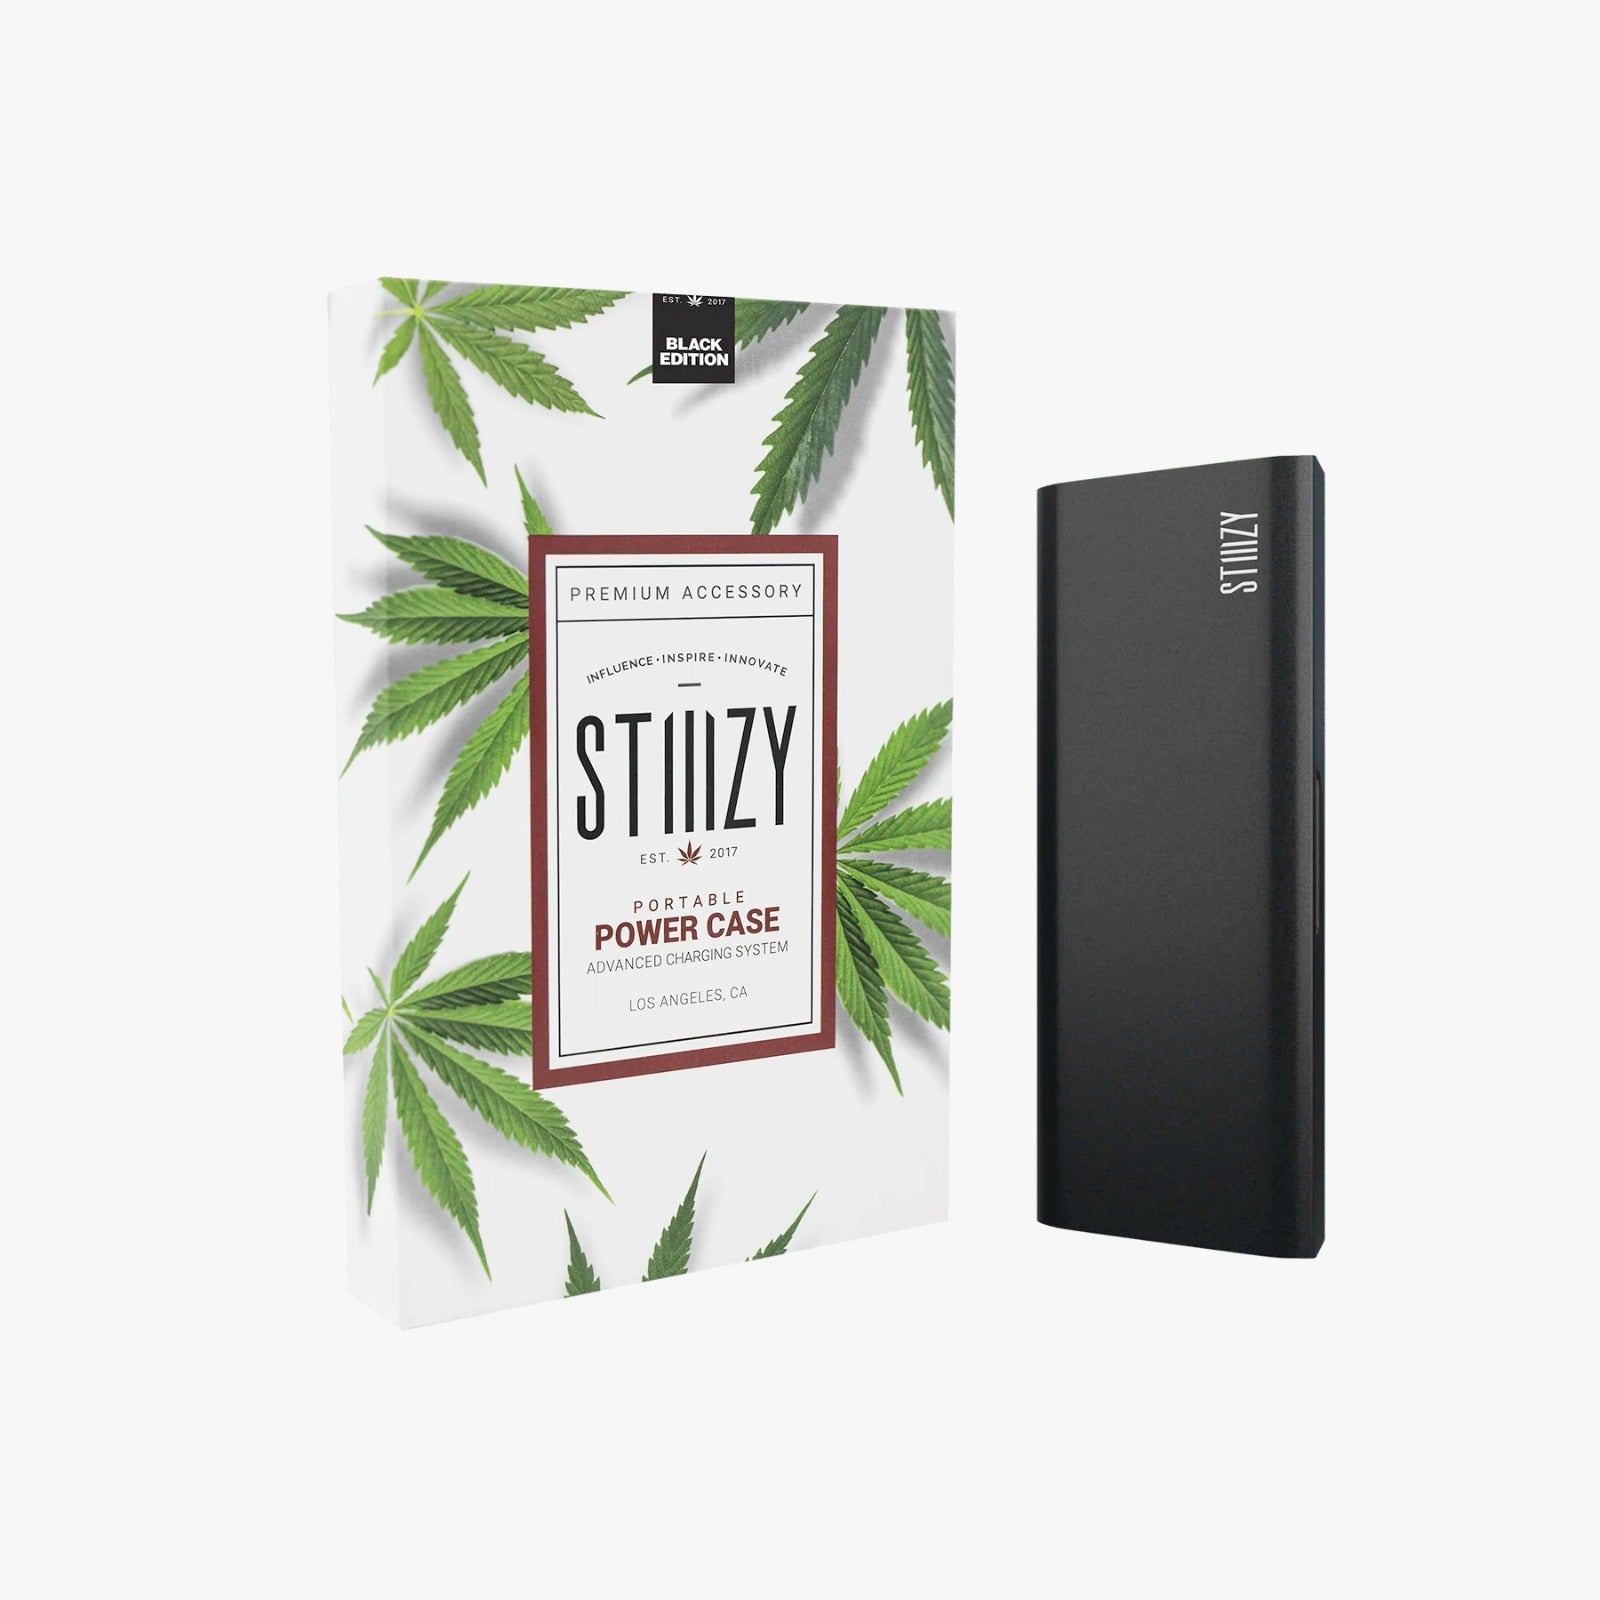 A black STIIIZY power case for charging weed pen batteries stands next to its package.